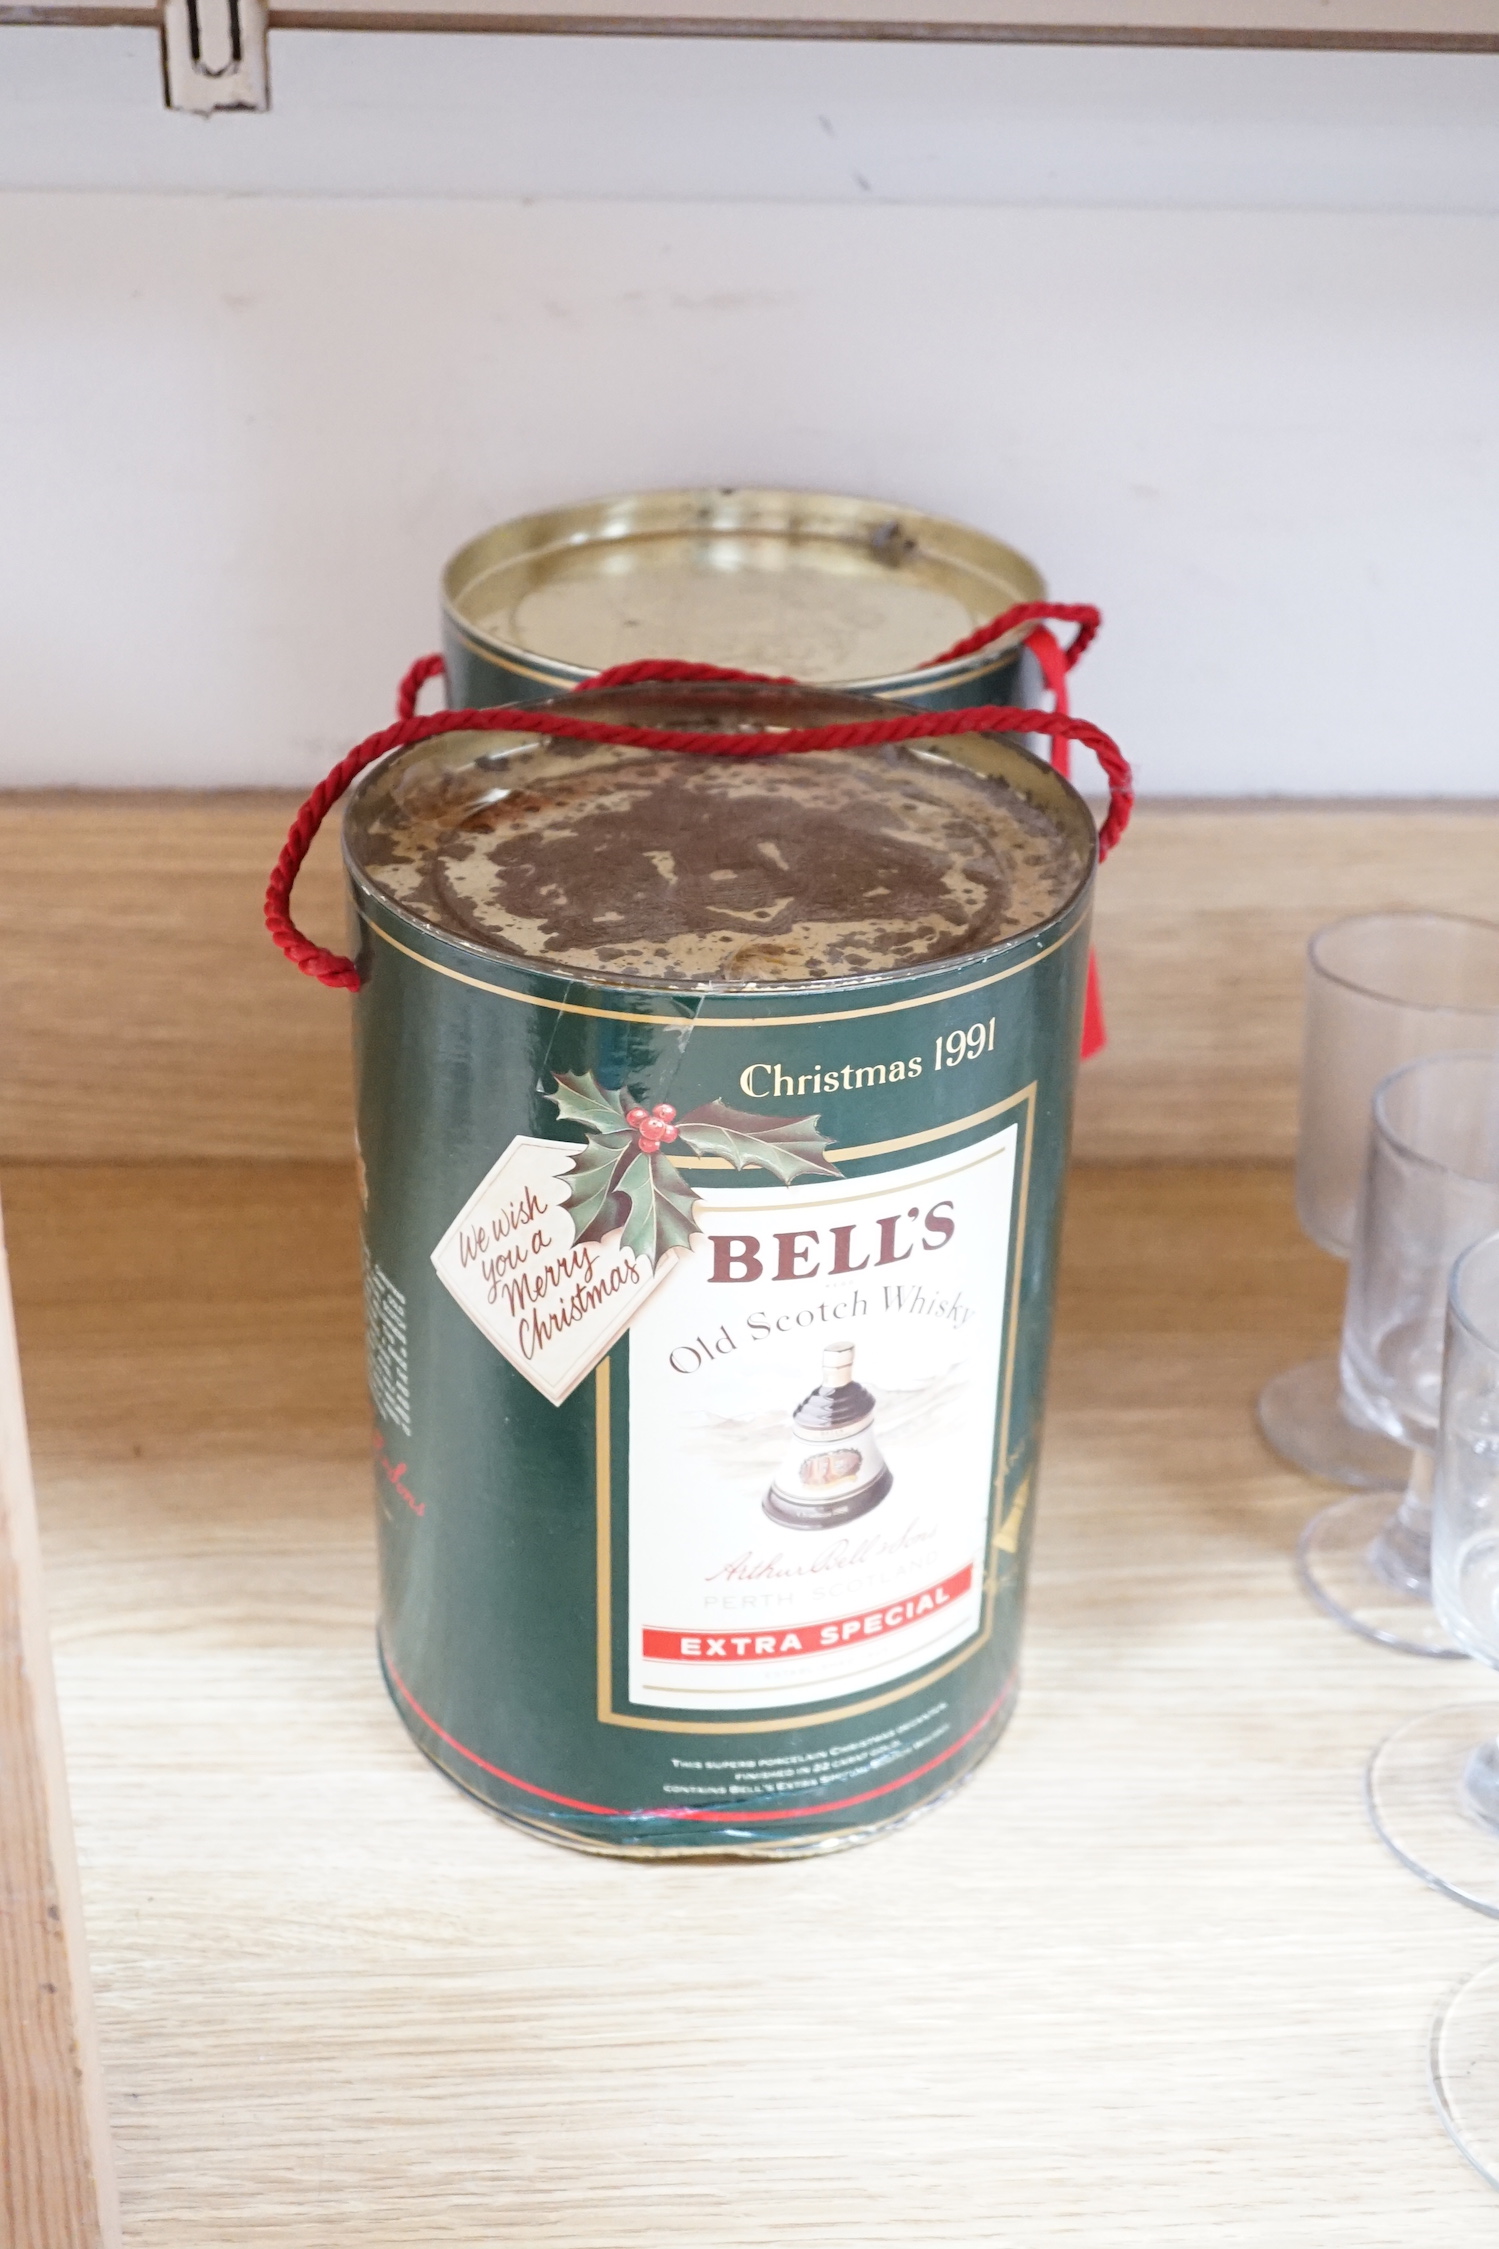 Five Christmas or New year Bell's whisky bottles, three in tins and one boxed